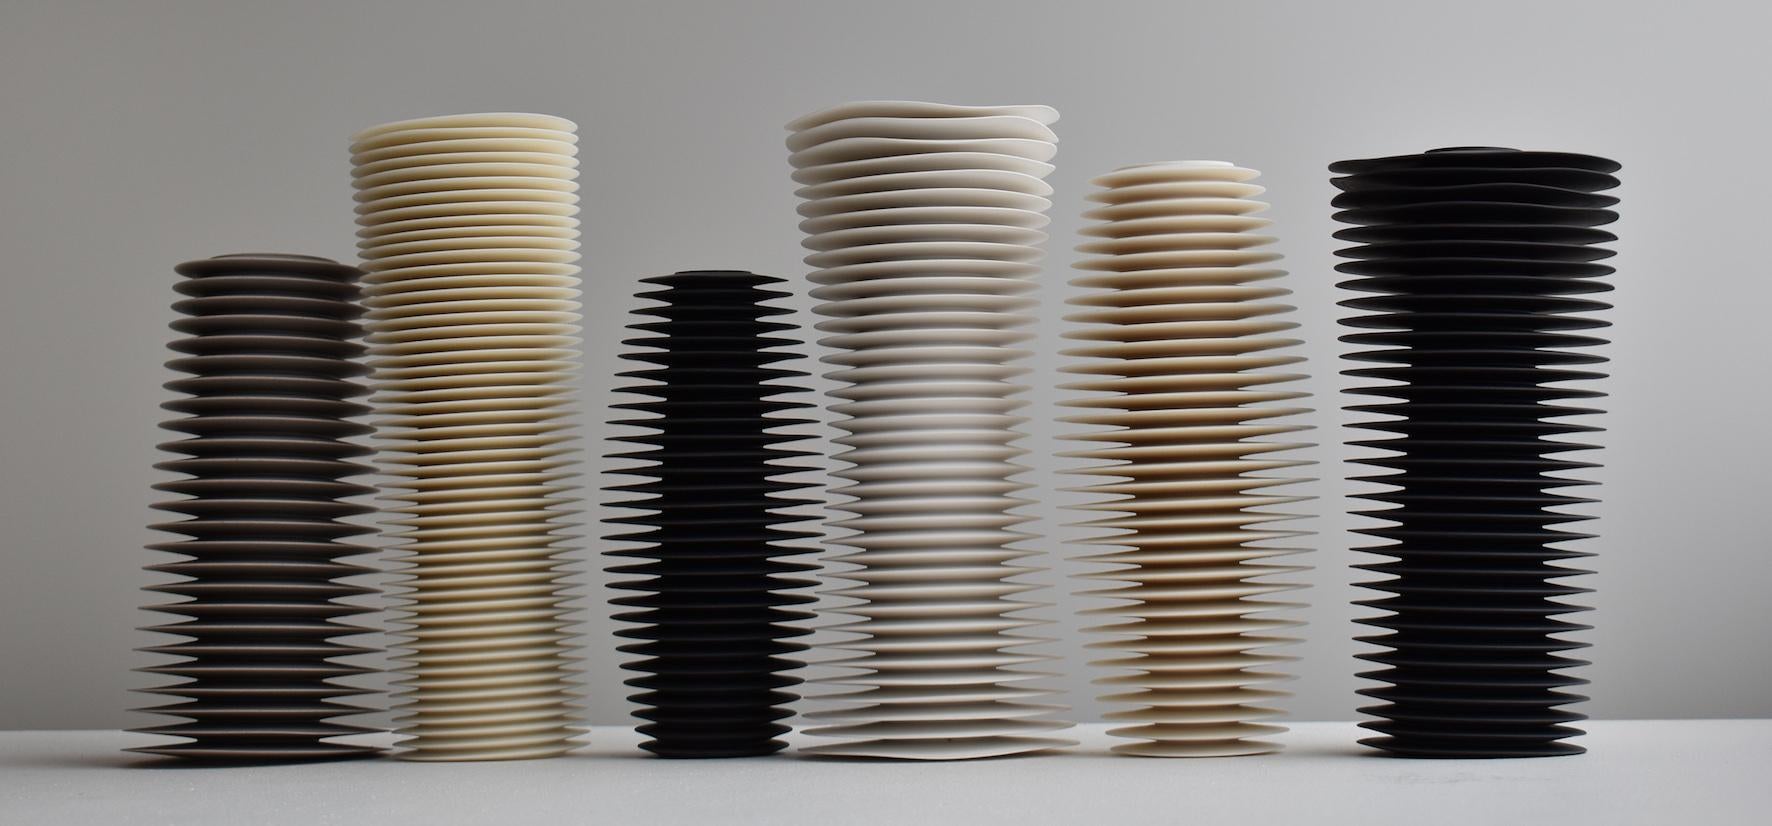 A six piece framed ceramic installation by acclaimed British ceramicist Nicholas Lees. The piece consists of six individually hand thrown and hand turned sculptures in parian porcelain, grey parian porcelain, bone china and black porcelain. These